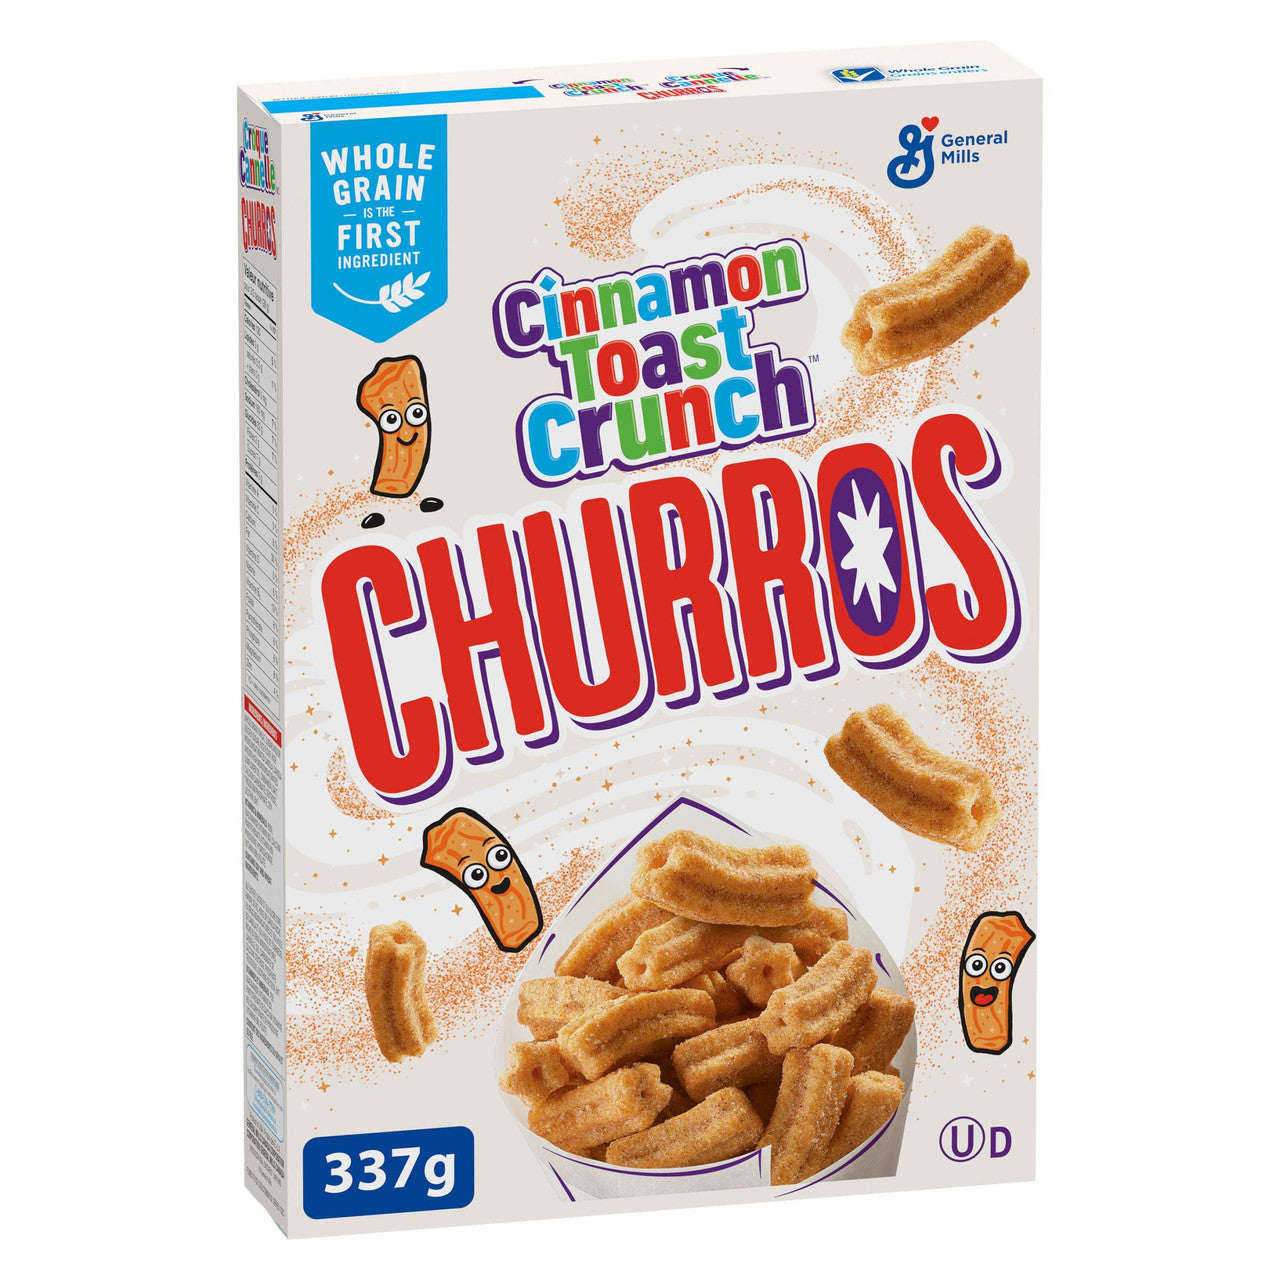 Cinnamon Toast Crunch Churros Cereal, 337g/11.9 oz., {Imported from Canada}